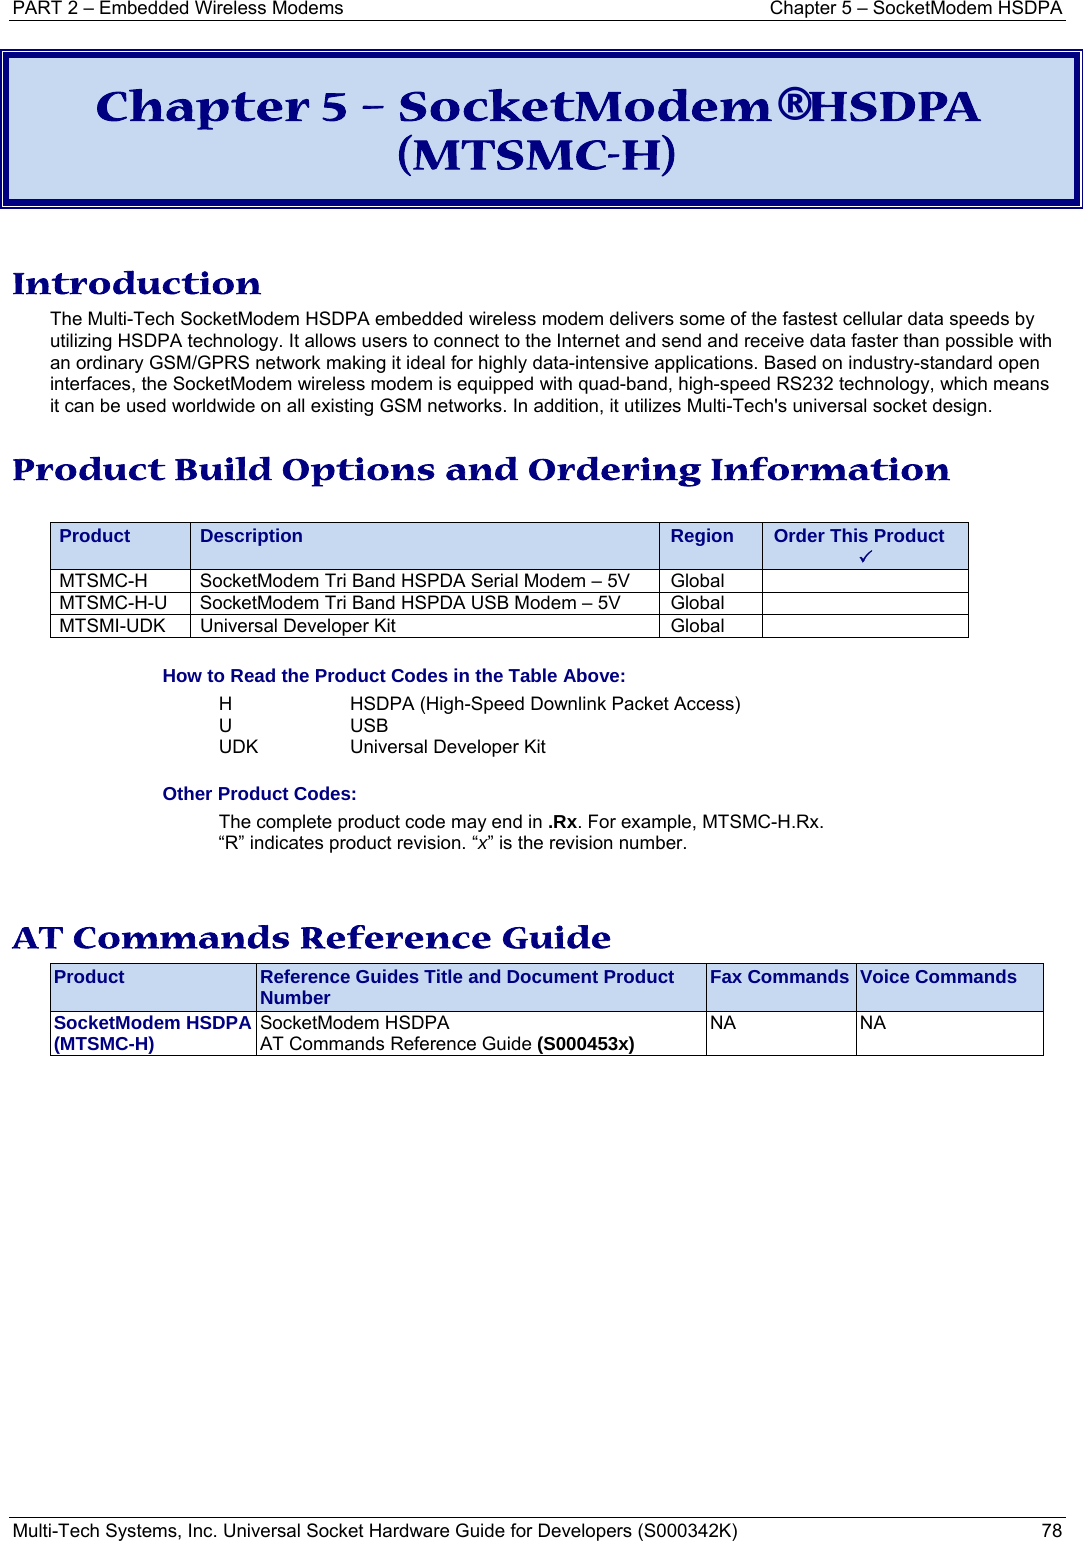 PART 2 – Embedded Wireless Modems  Chapter 5 – SocketModem HSDPA Multi-Tech Systems, Inc. Universal Socket Hardware Guide for Developers (S000342K)  78  Chapter 5 – SocketModem® HSDPA (MTSMC-H)  Introduction The Multi-Tech SocketModem HSDPA embedded wireless modem delivers some of the fastest cellular data speeds by utilizing HSDPA technology. It allows users to connect to the Internet and send and receive data faster than possible with an ordinary GSM/GPRS network making it ideal for highly data-intensive applications. Based on industry-standard open interfaces, the SocketModem wireless modem is equipped with quad-band, high-speed RS232 technology, which means it can be used worldwide on all existing GSM networks. In addition, it utilizes Multi-Tech&apos;s universal socket design. Product Build Options and Ordering Information  Product Description Region Order This Product 3 MTSMC-H  SocketModem Tri Band HSPDA Serial Modem – 5V  Global   MTSMC-H-U  SocketModem Tri Band HSPDA USB Modem – 5V  Global   MTSMI-UDK  Universal Developer Kit  Global    How to Read the Product Codes in the Table Above: H  HSDPA (High-Speed Downlink Packet Access) U USB  UDK  Universal Developer Kit Other Product Codes: The complete product code may end in .Rx. For example, MTSMC-H.Rx.   “R” indicates product revision. “x” is the revision number.   AT Commands Reference Guide Product  Reference Guides Title and Document Product Number  Fax Commands  Voice Commands SocketModem HSDPA (MTSMC-H)  SocketModem HSDPA  AT Commands Reference Guide (S000453x)  NA NA   